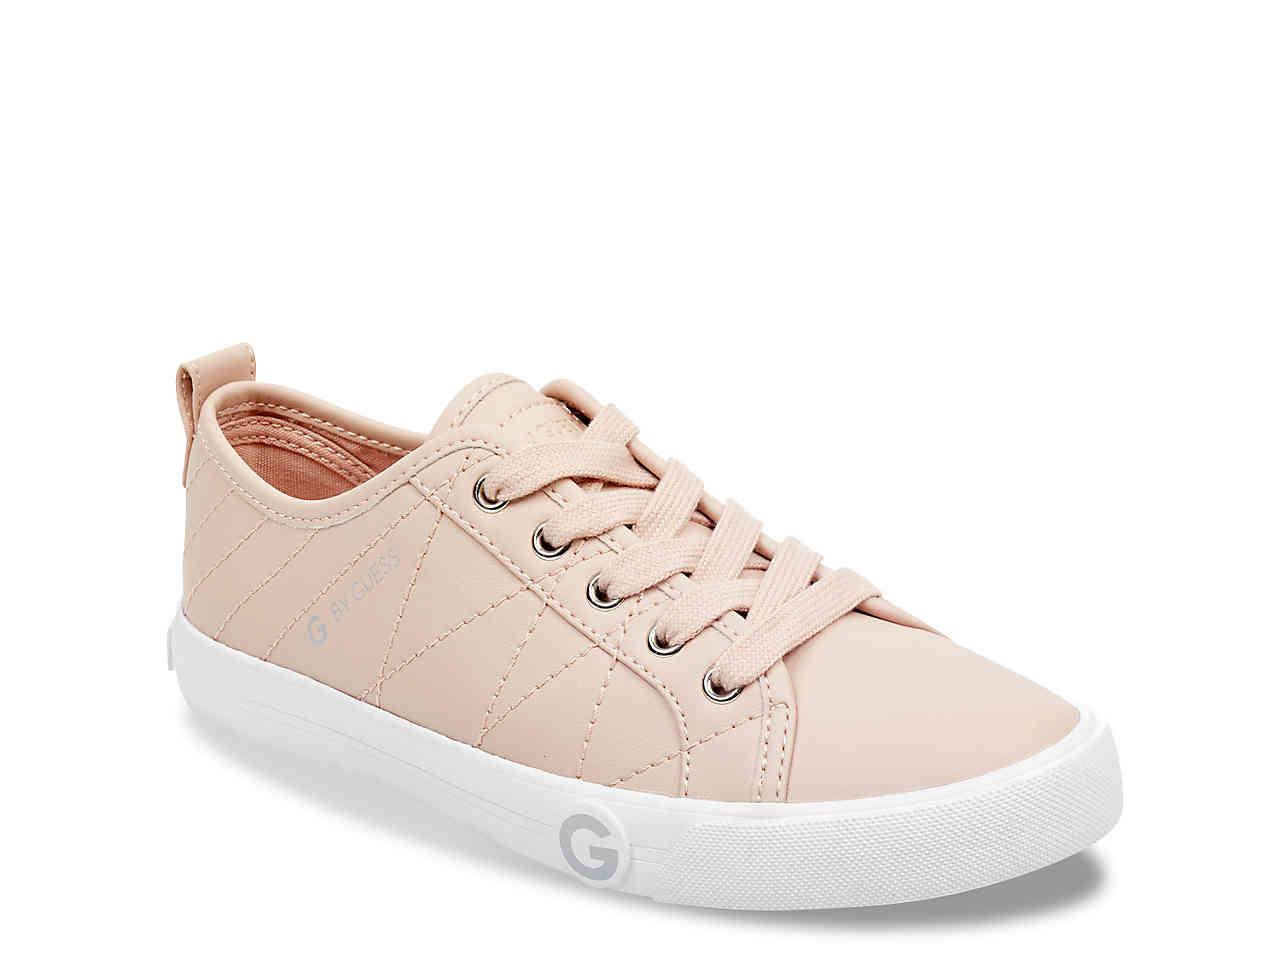 G by Guess Orfin Sneaker in Light Pink 